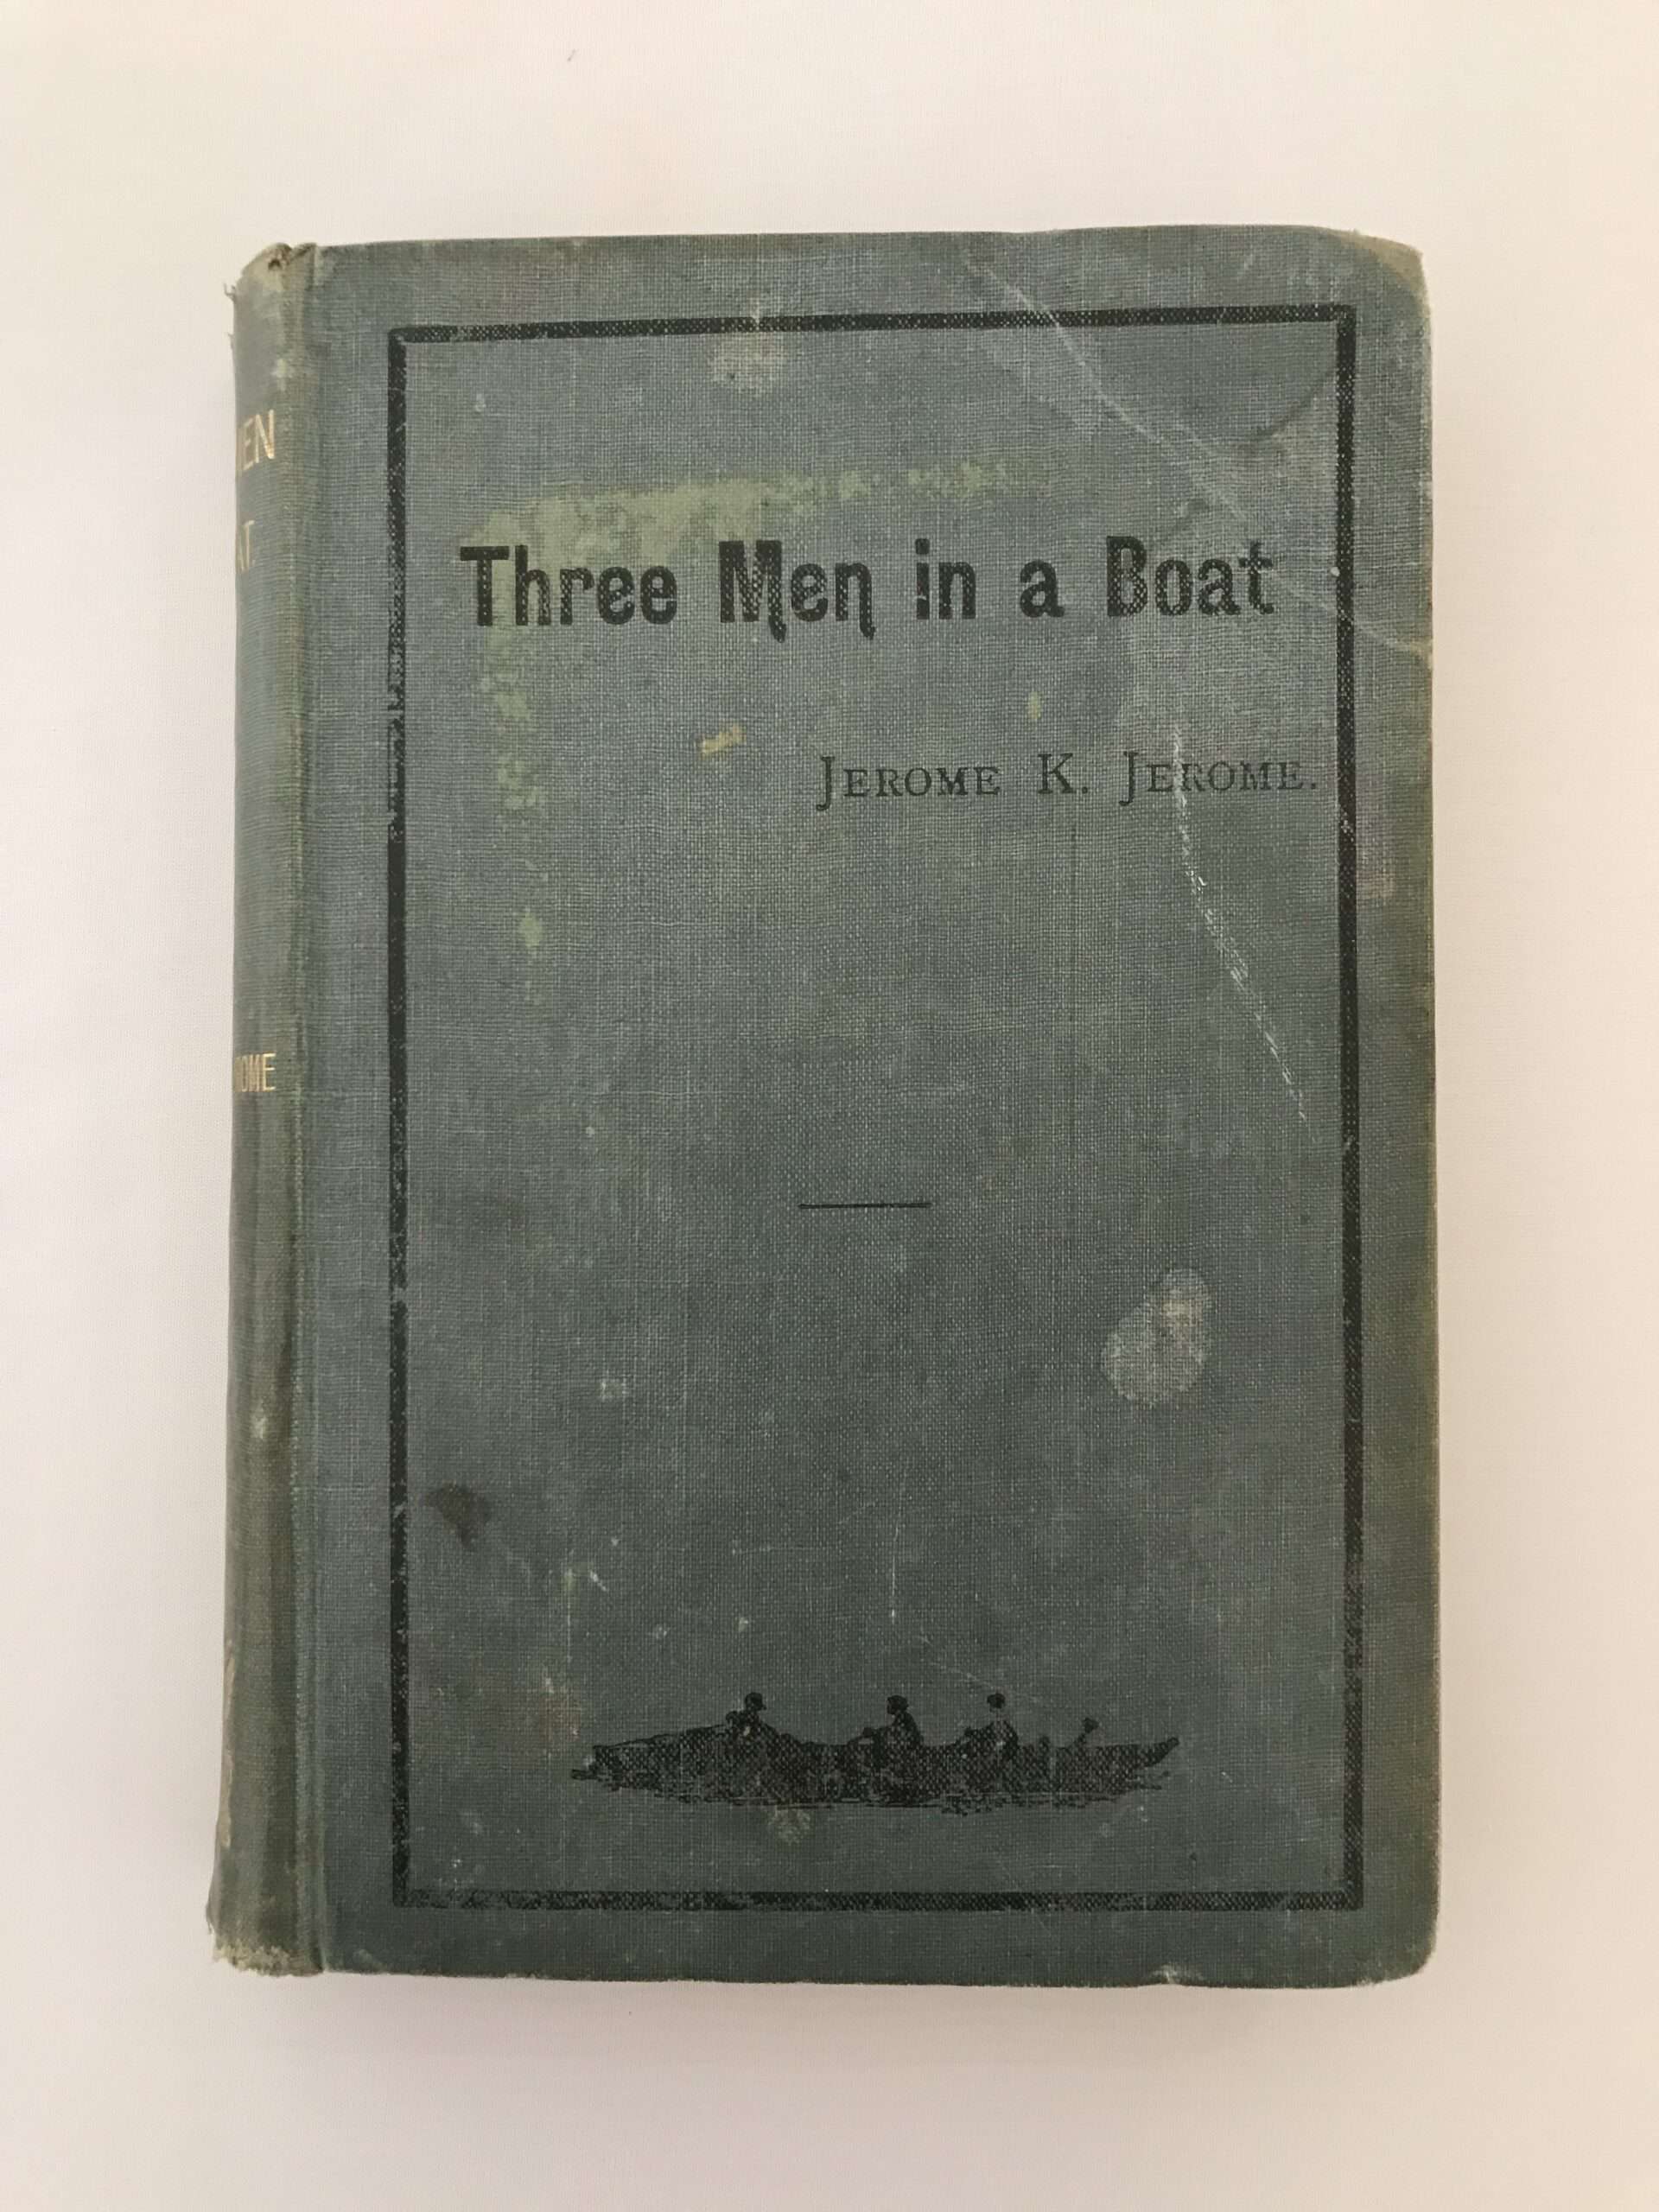 jerome k jerome three men in a boat on the bummel first editions2